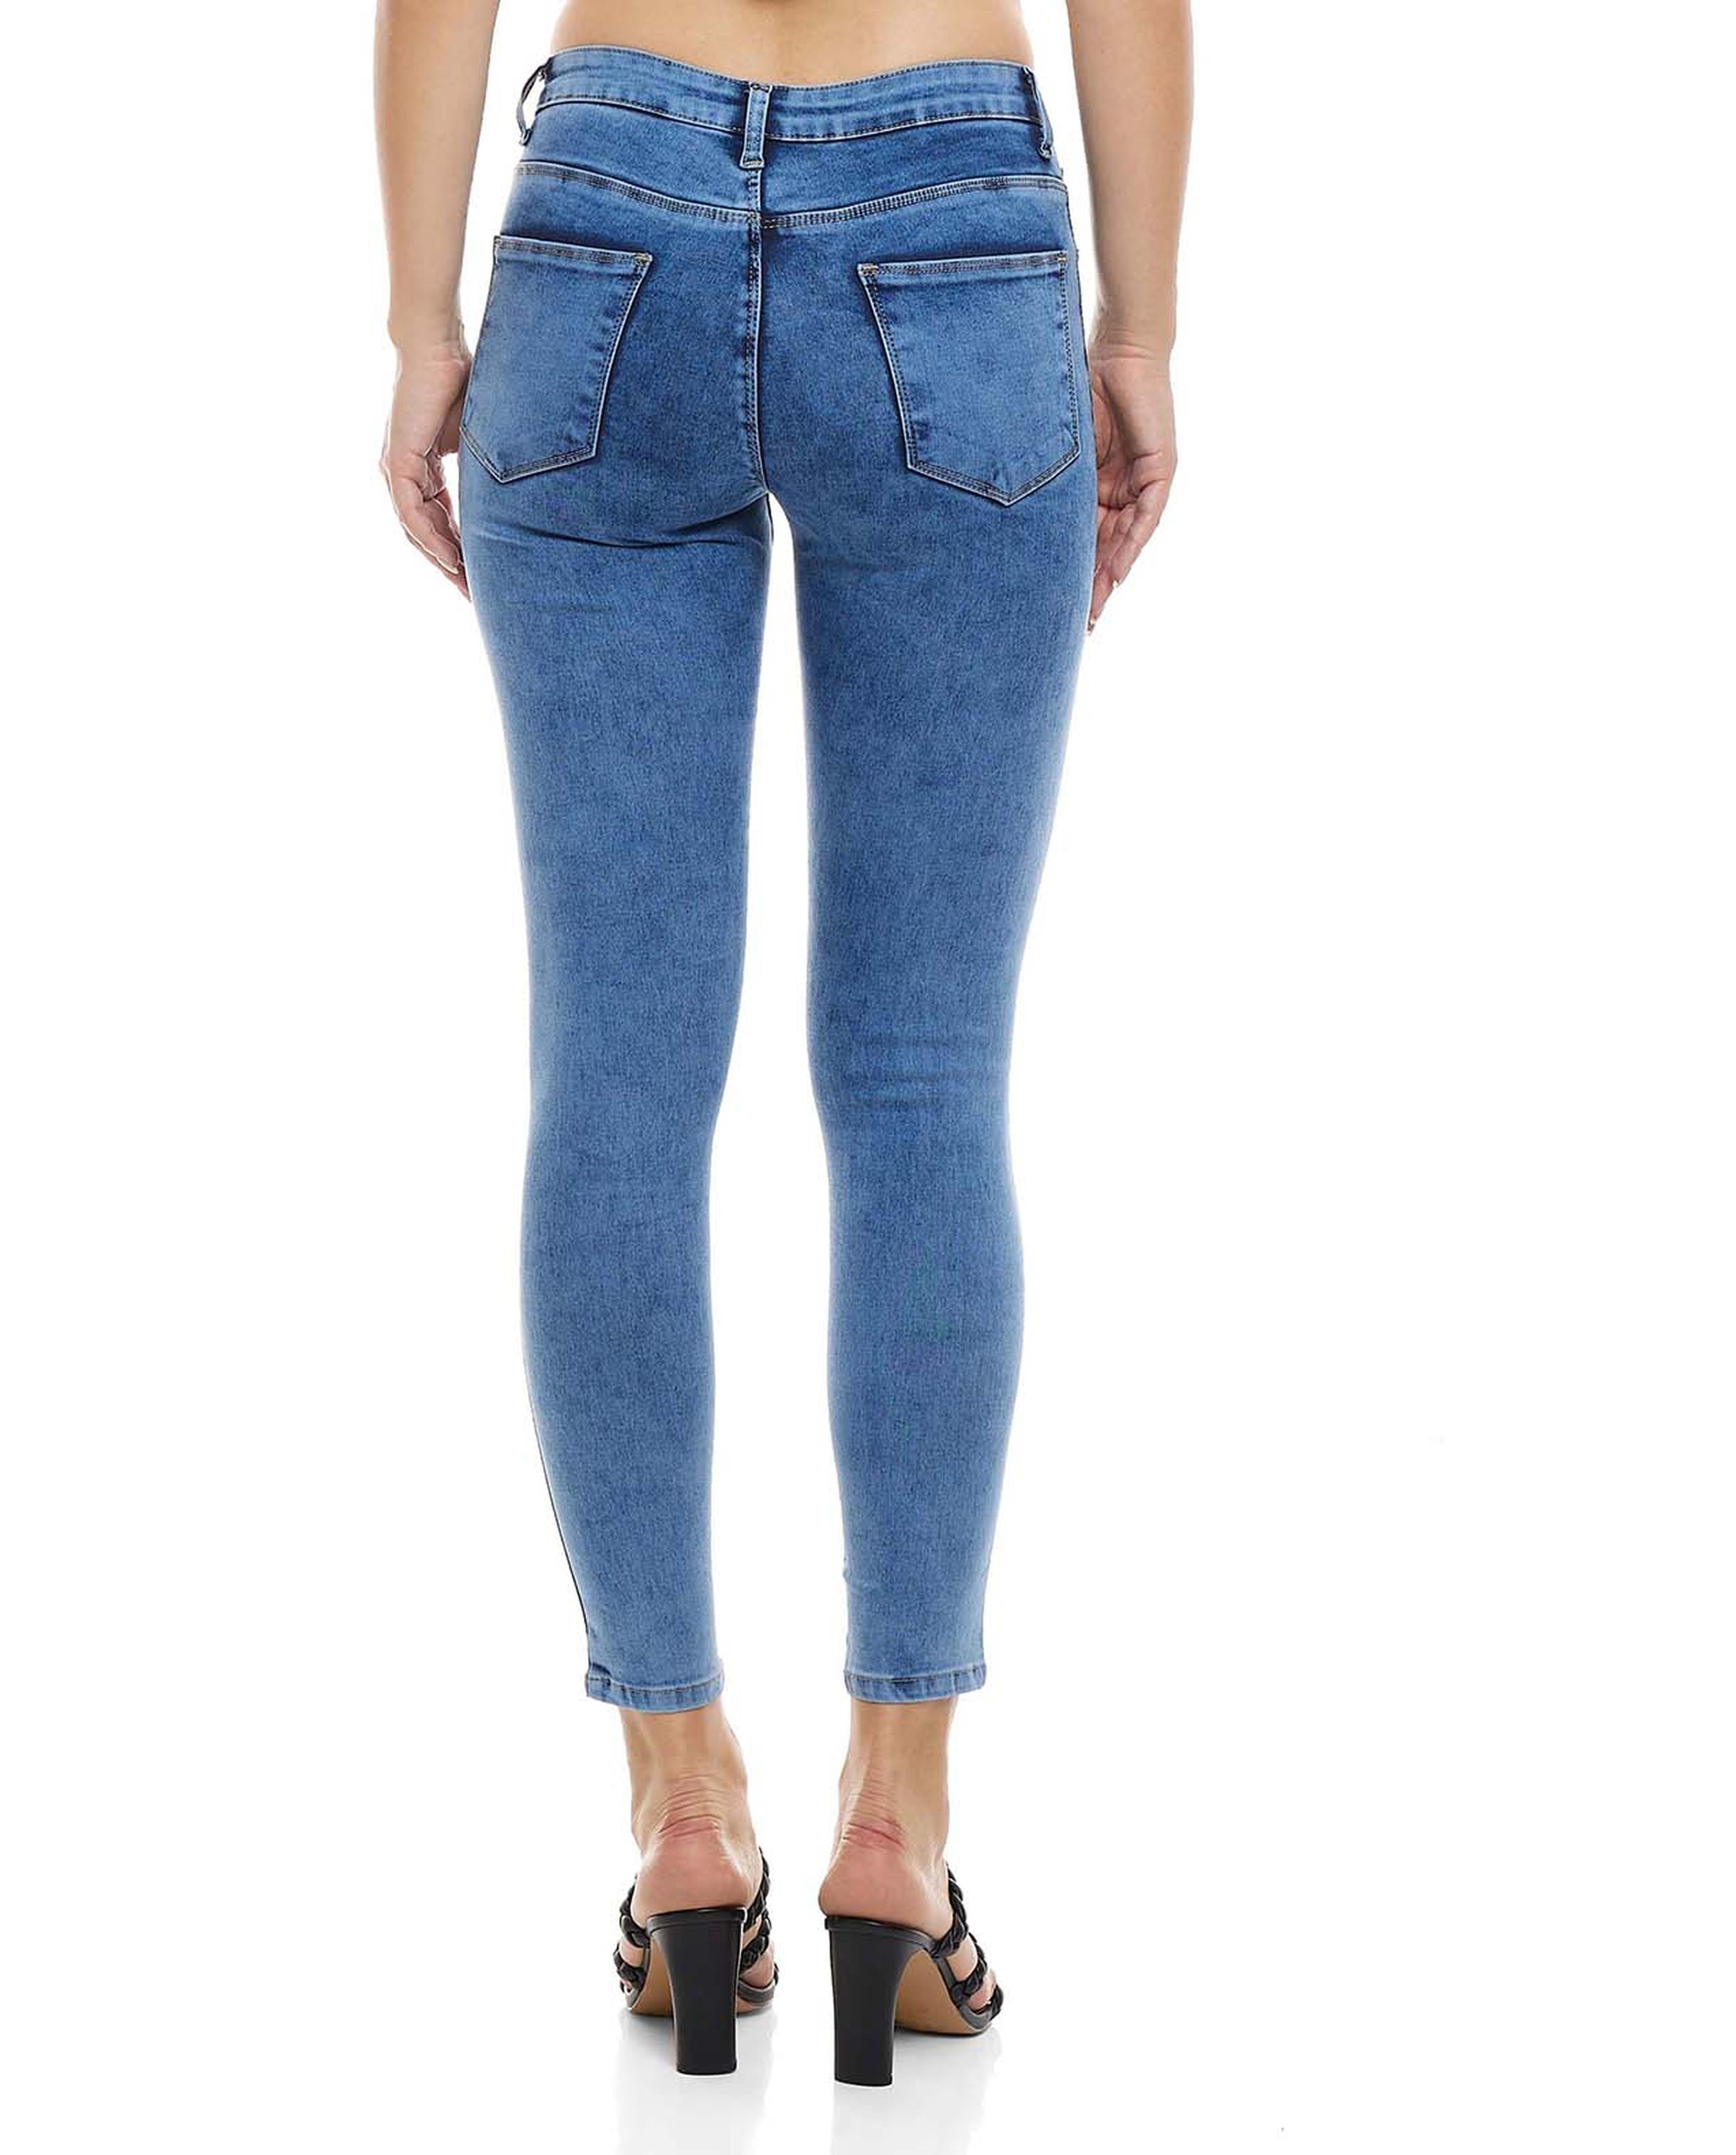 Skinny Fit Jeans with Button Closure